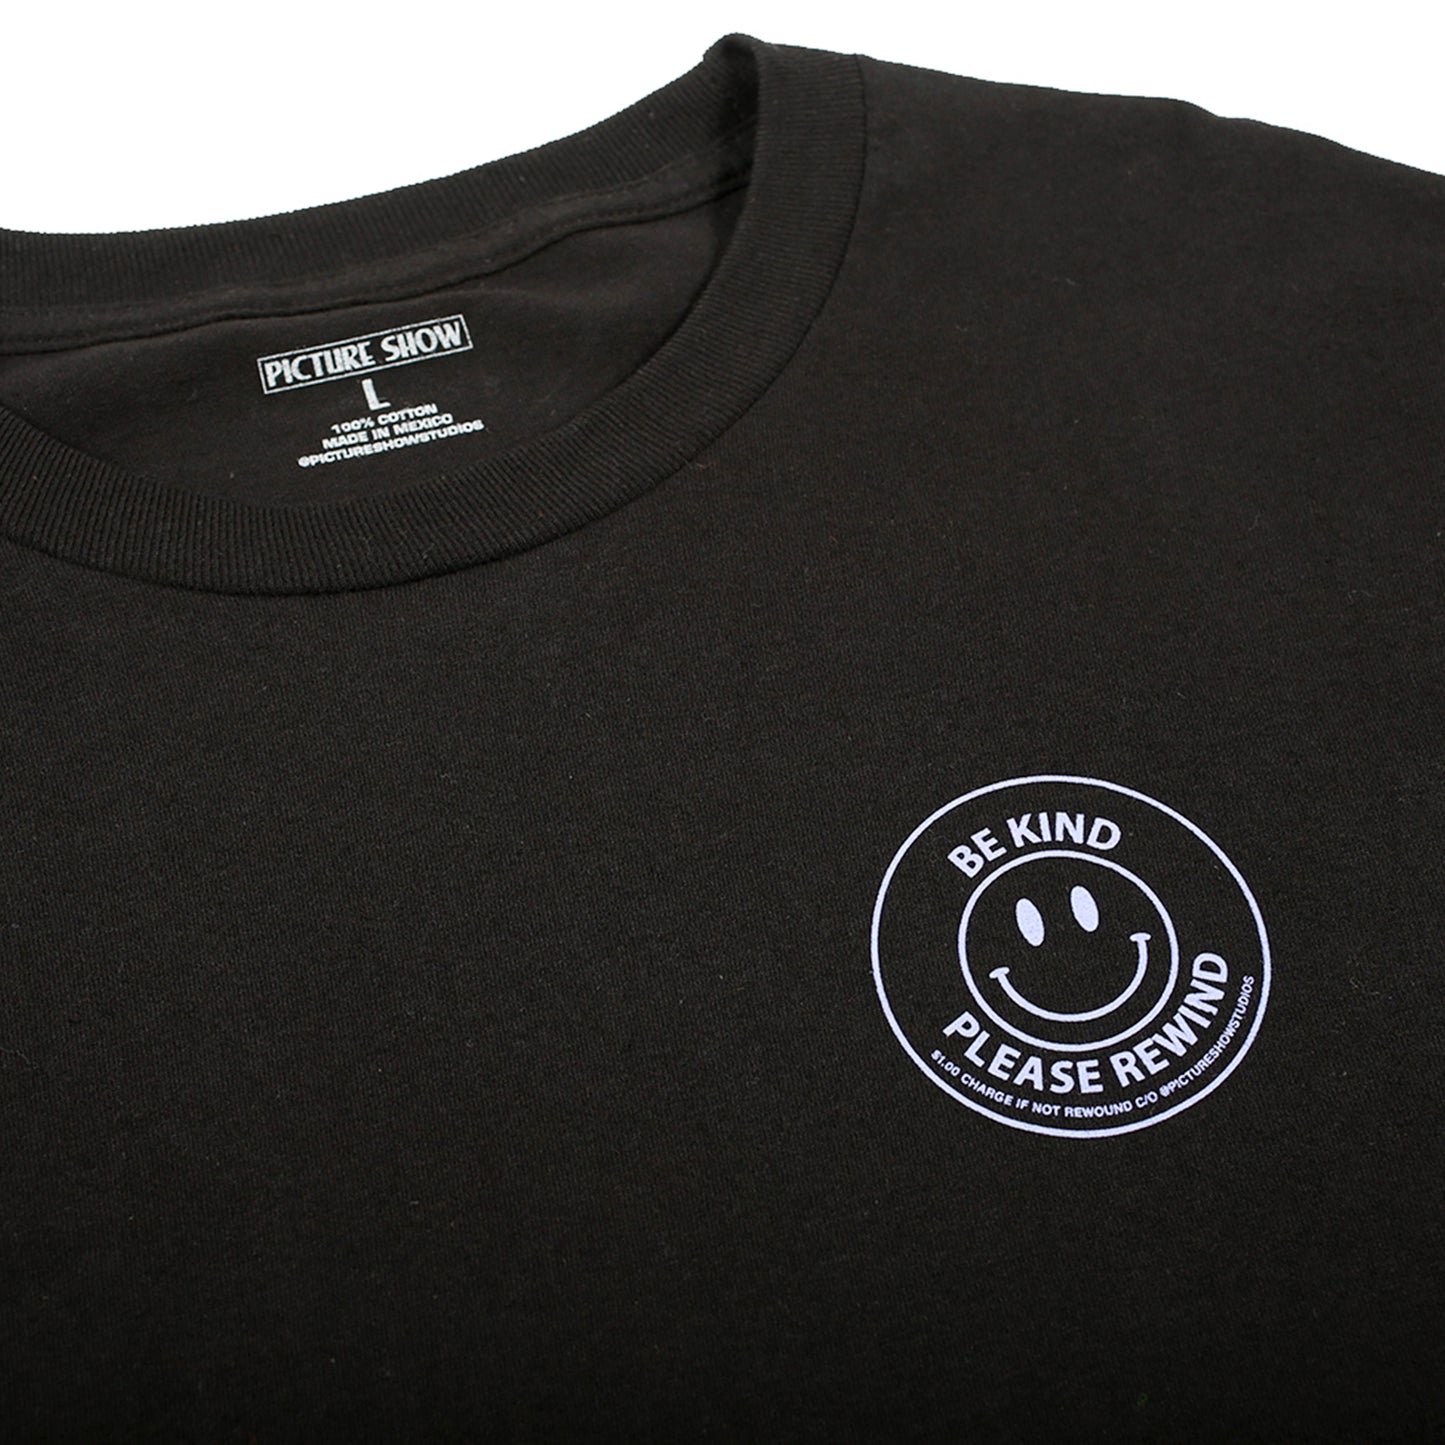 PICTURE SHOW BE KIND L/S TEE - BLACK